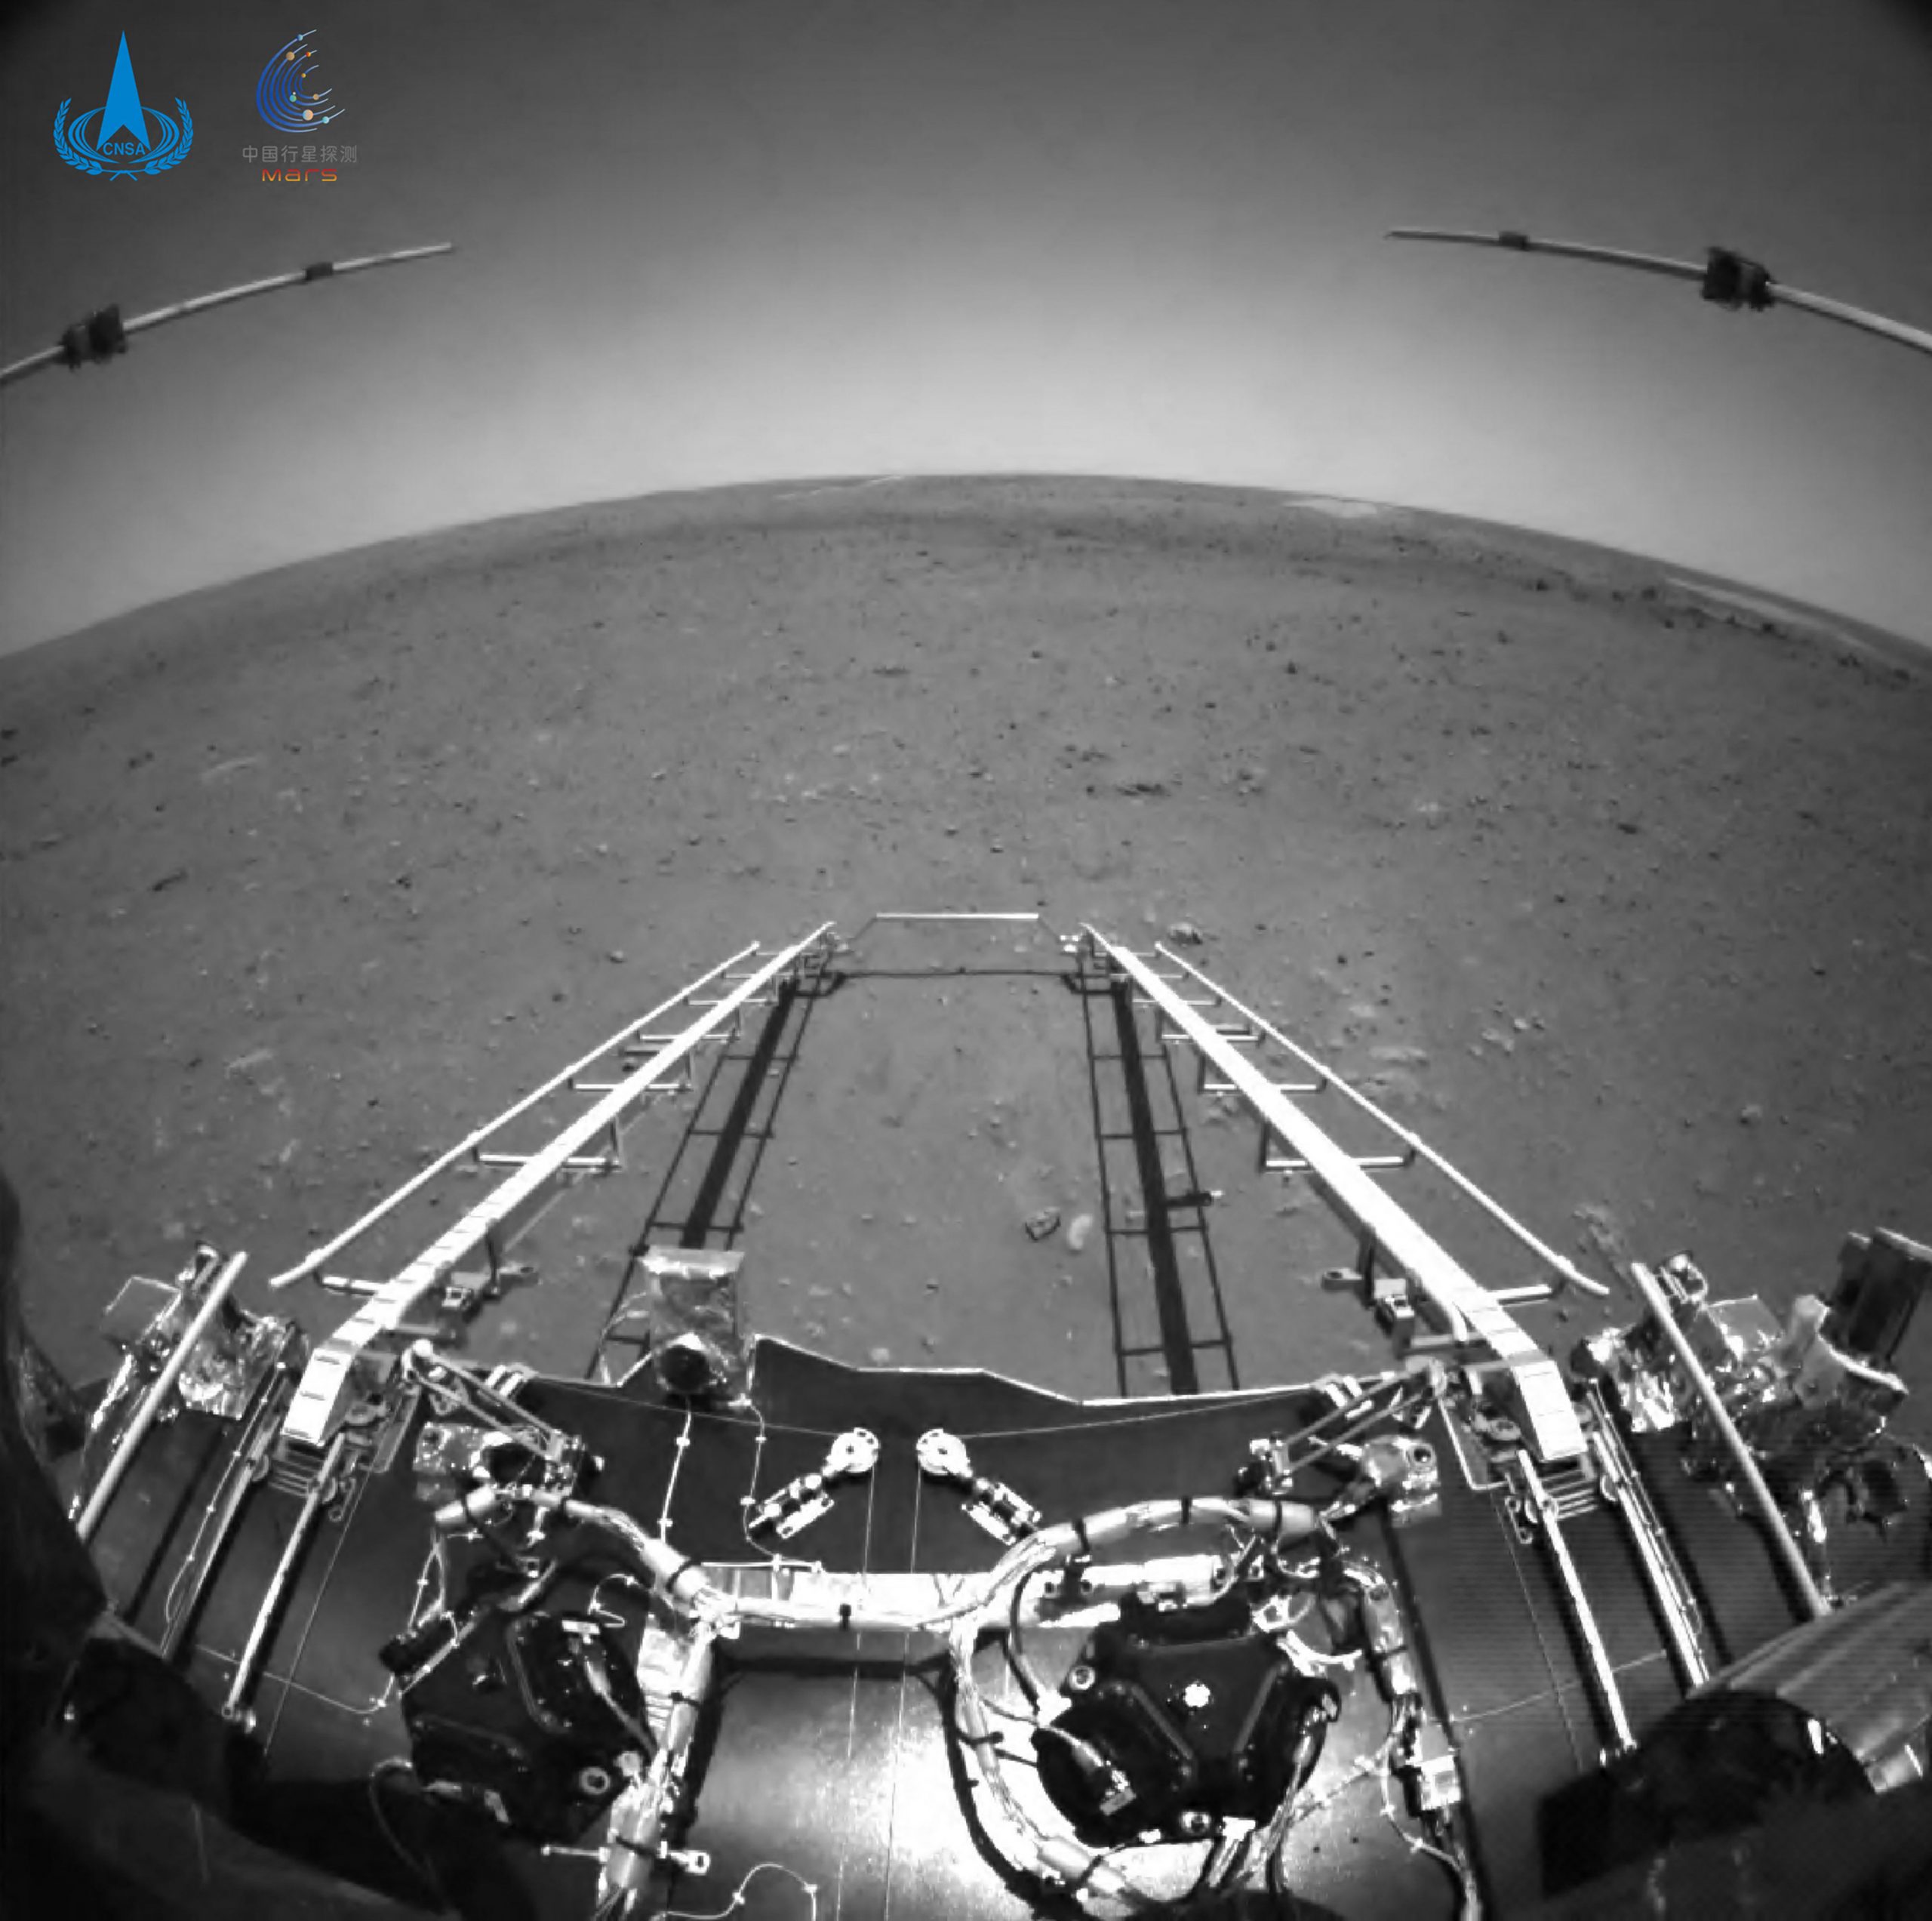 China’s Mars rover explores northern lava plain on the Red Planet